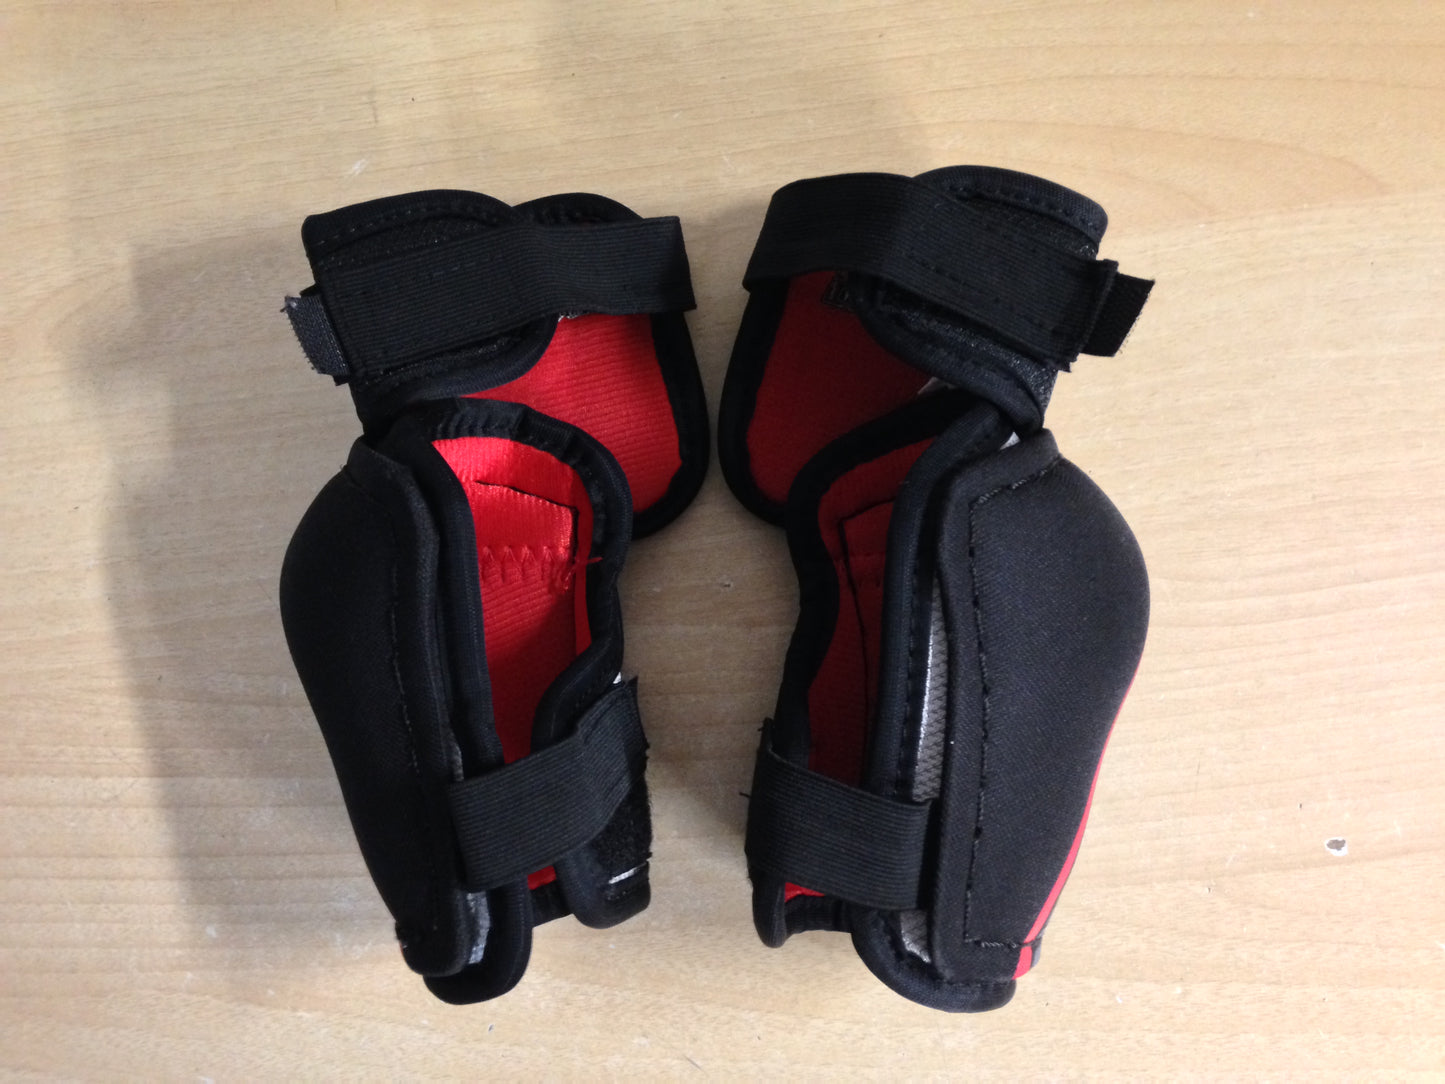 Hockey Elbow Pad Child Size Y Large 5-6 Easton Black Red Excellent